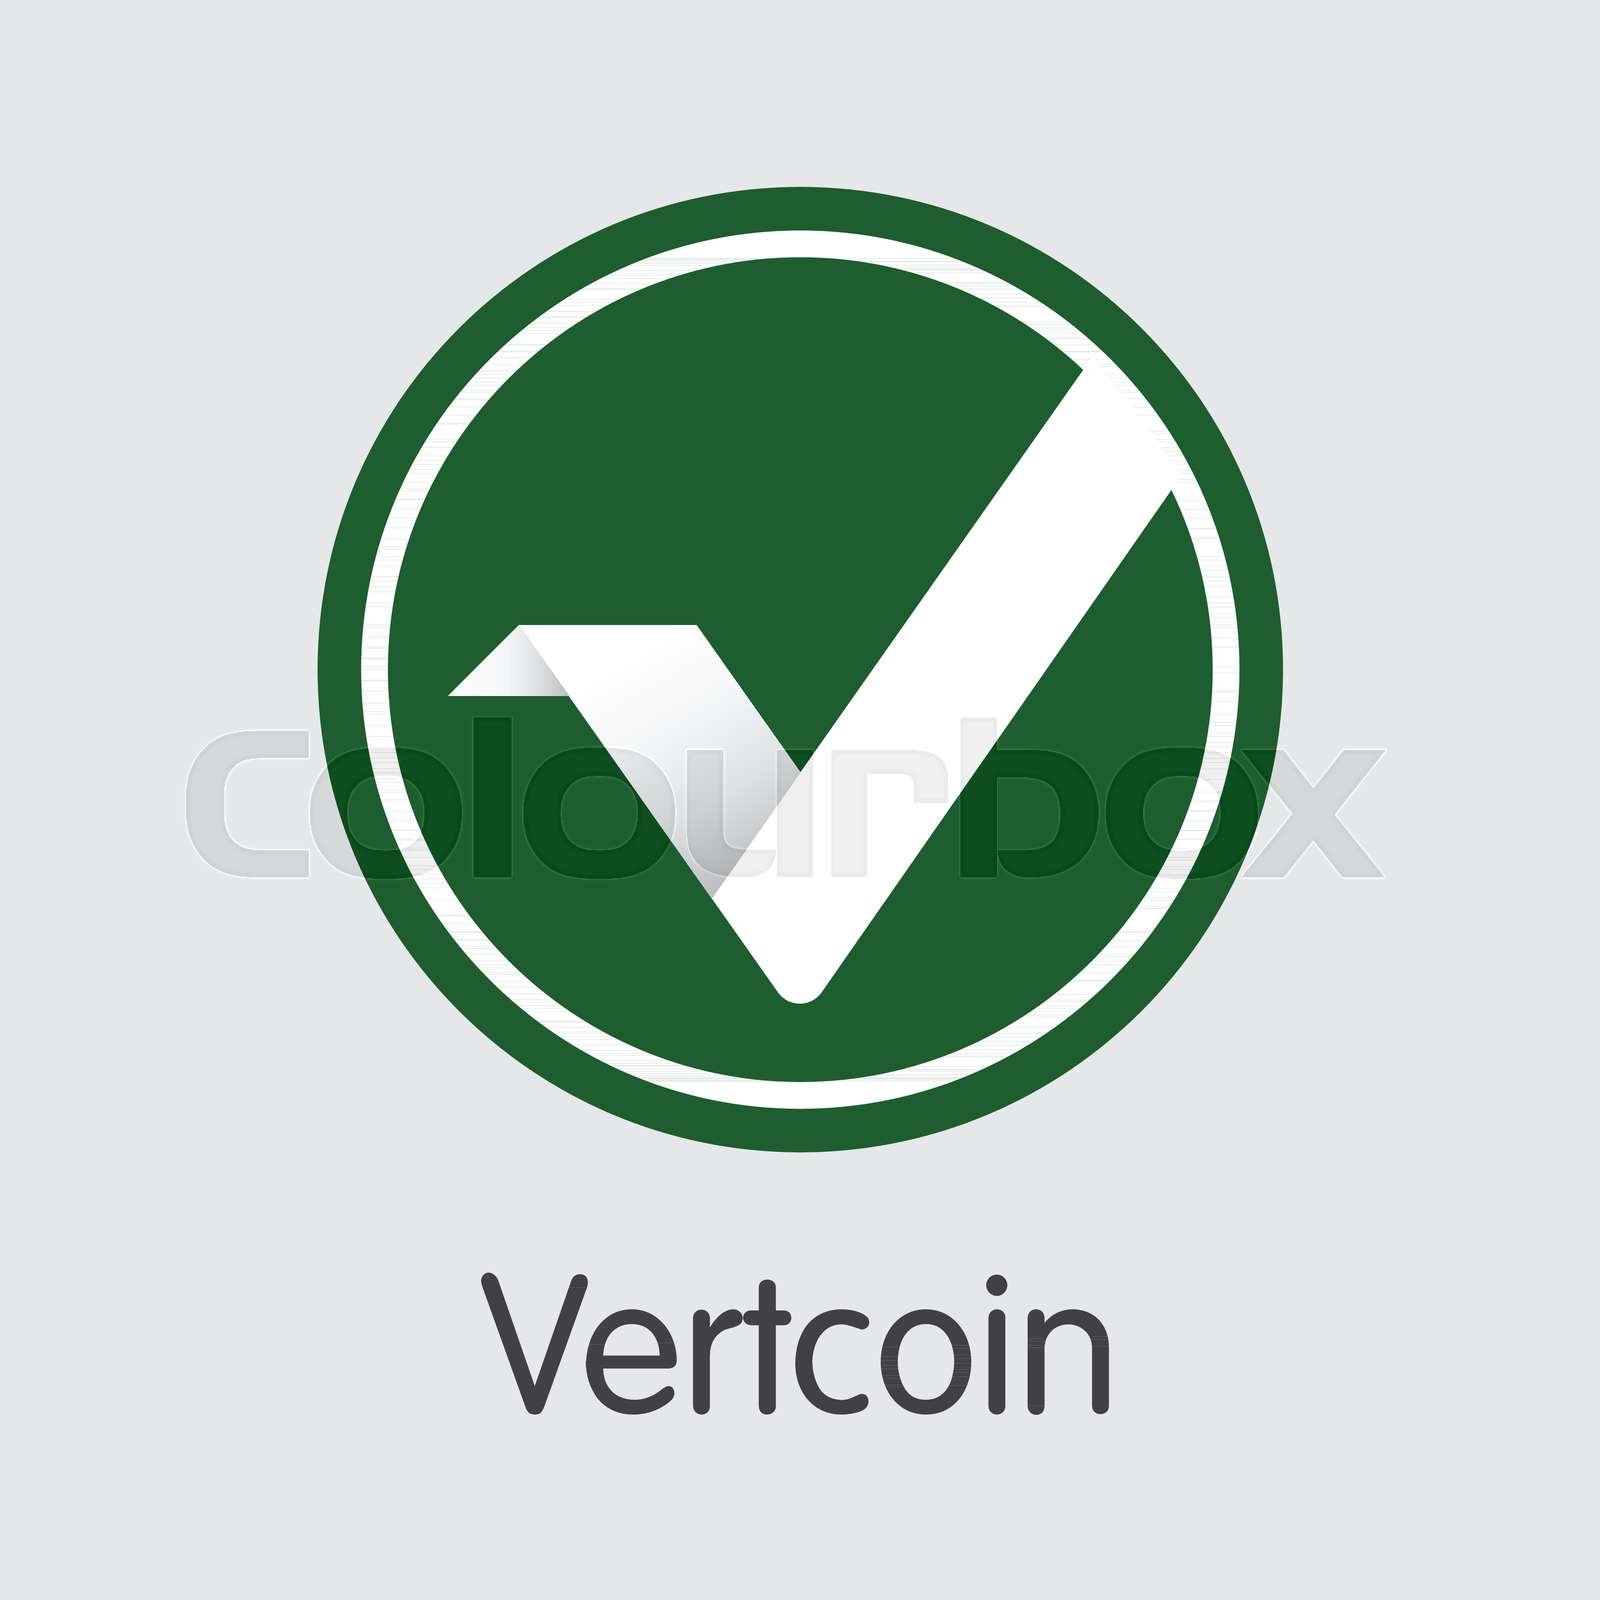 How to Mine Vertcoin (VTC): A Step-by-Step Beginner's Guide